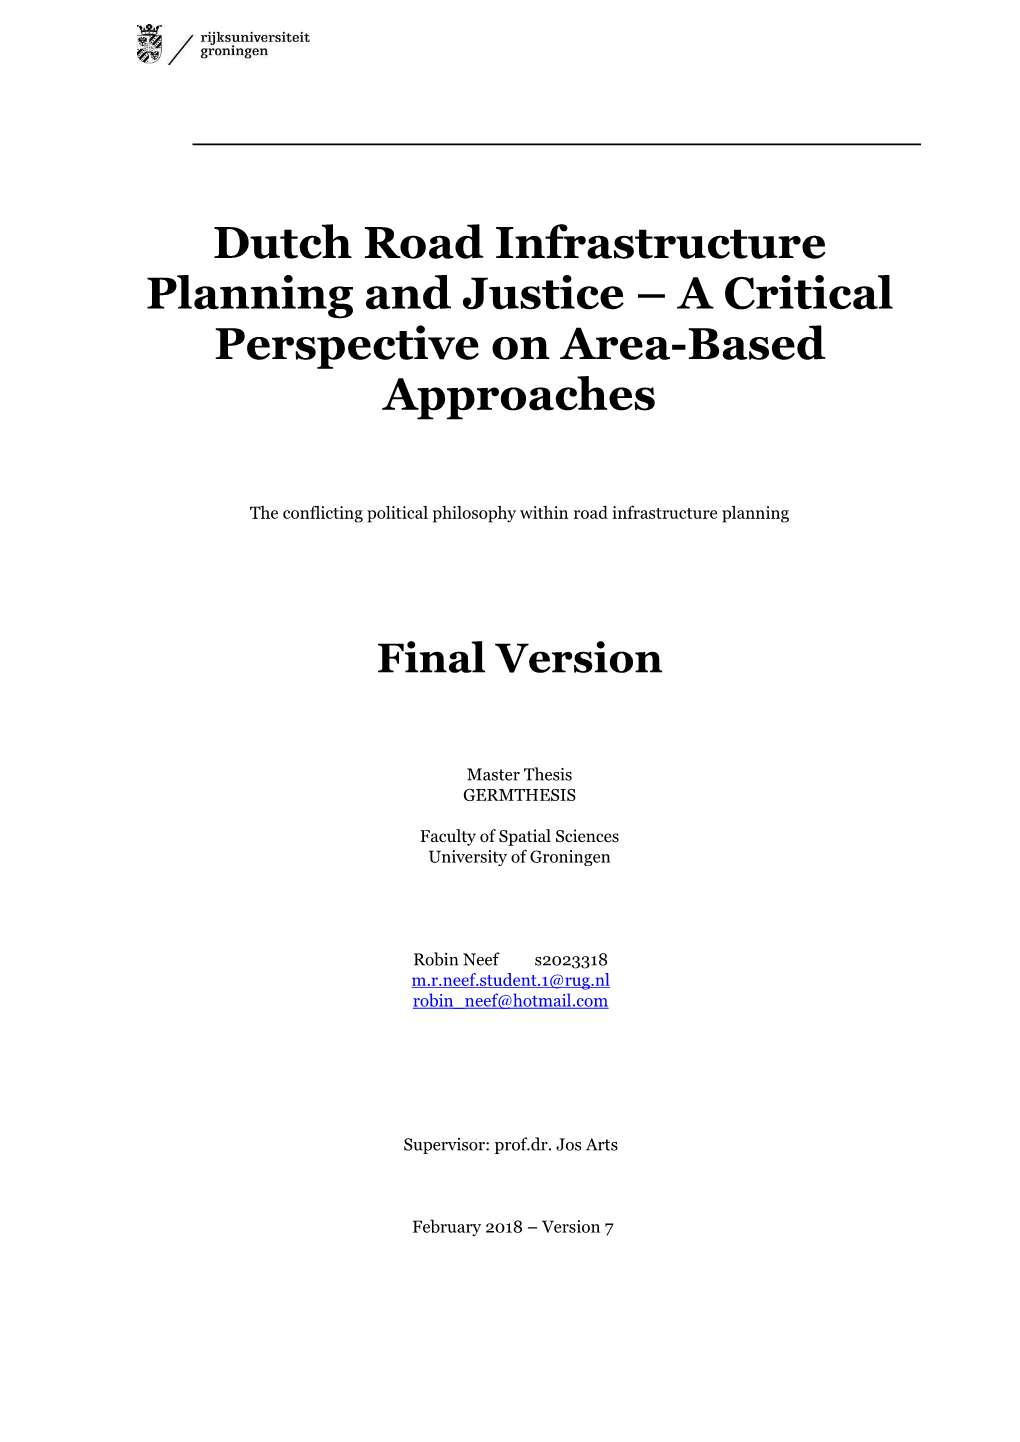 Dutch Road Infrastructure Planning and Justice – a Critical Perspective on Area-Based Approaches